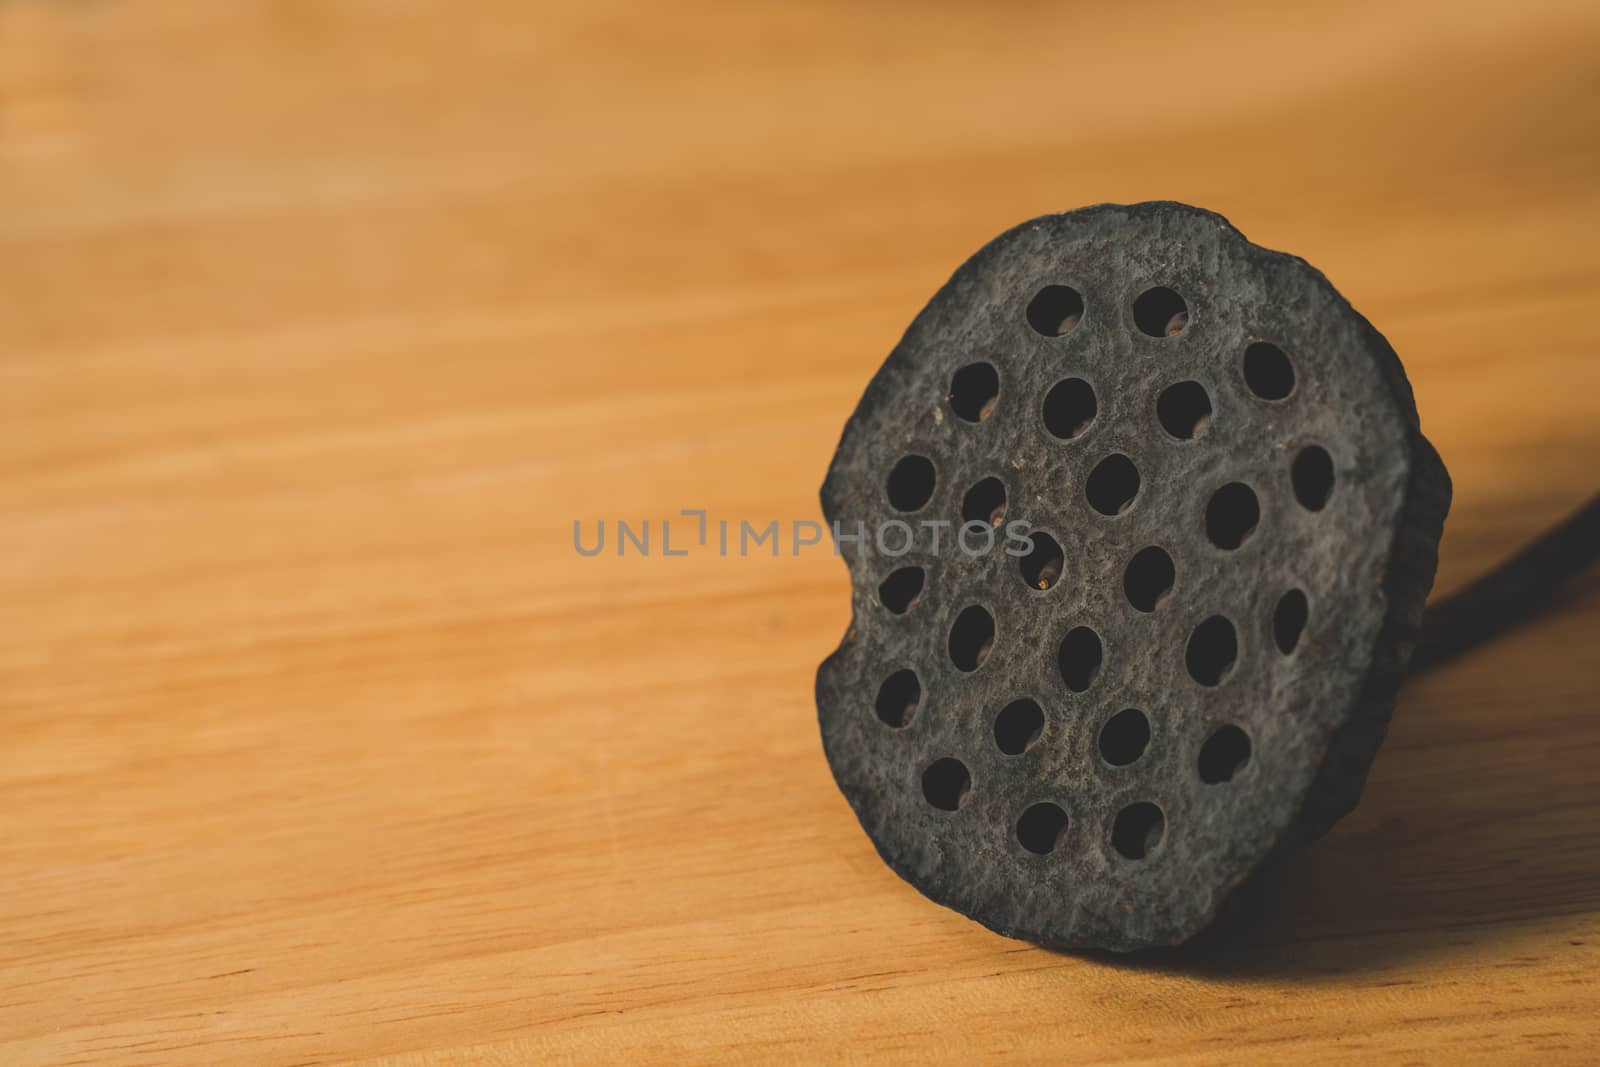 The Black dry lotus seed on wooden table background